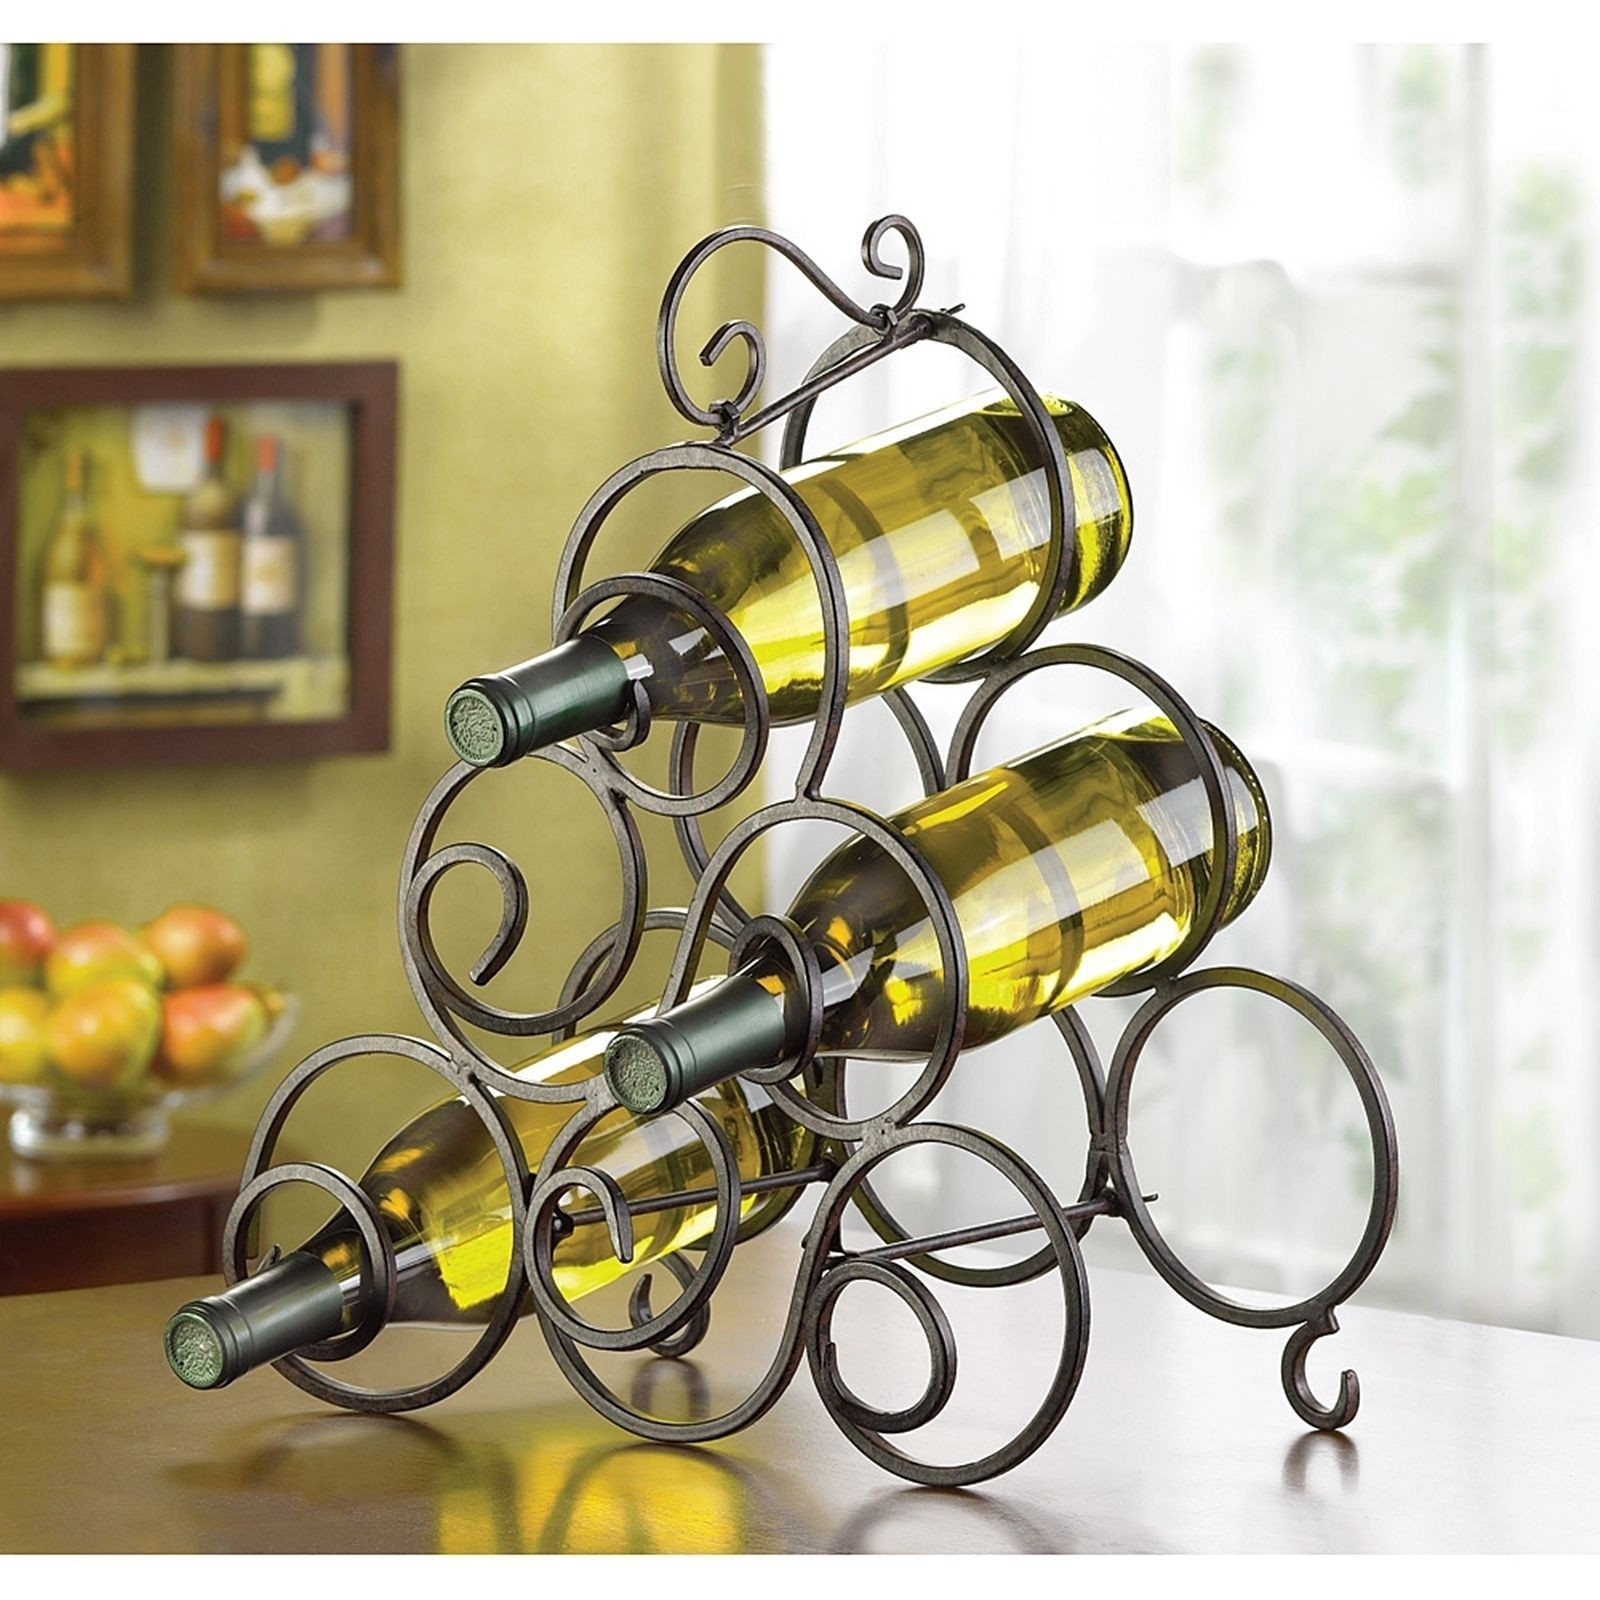 Gifts & Decor Wrought Iron Scrollwork Spiral Wine Bottle Rack Stand